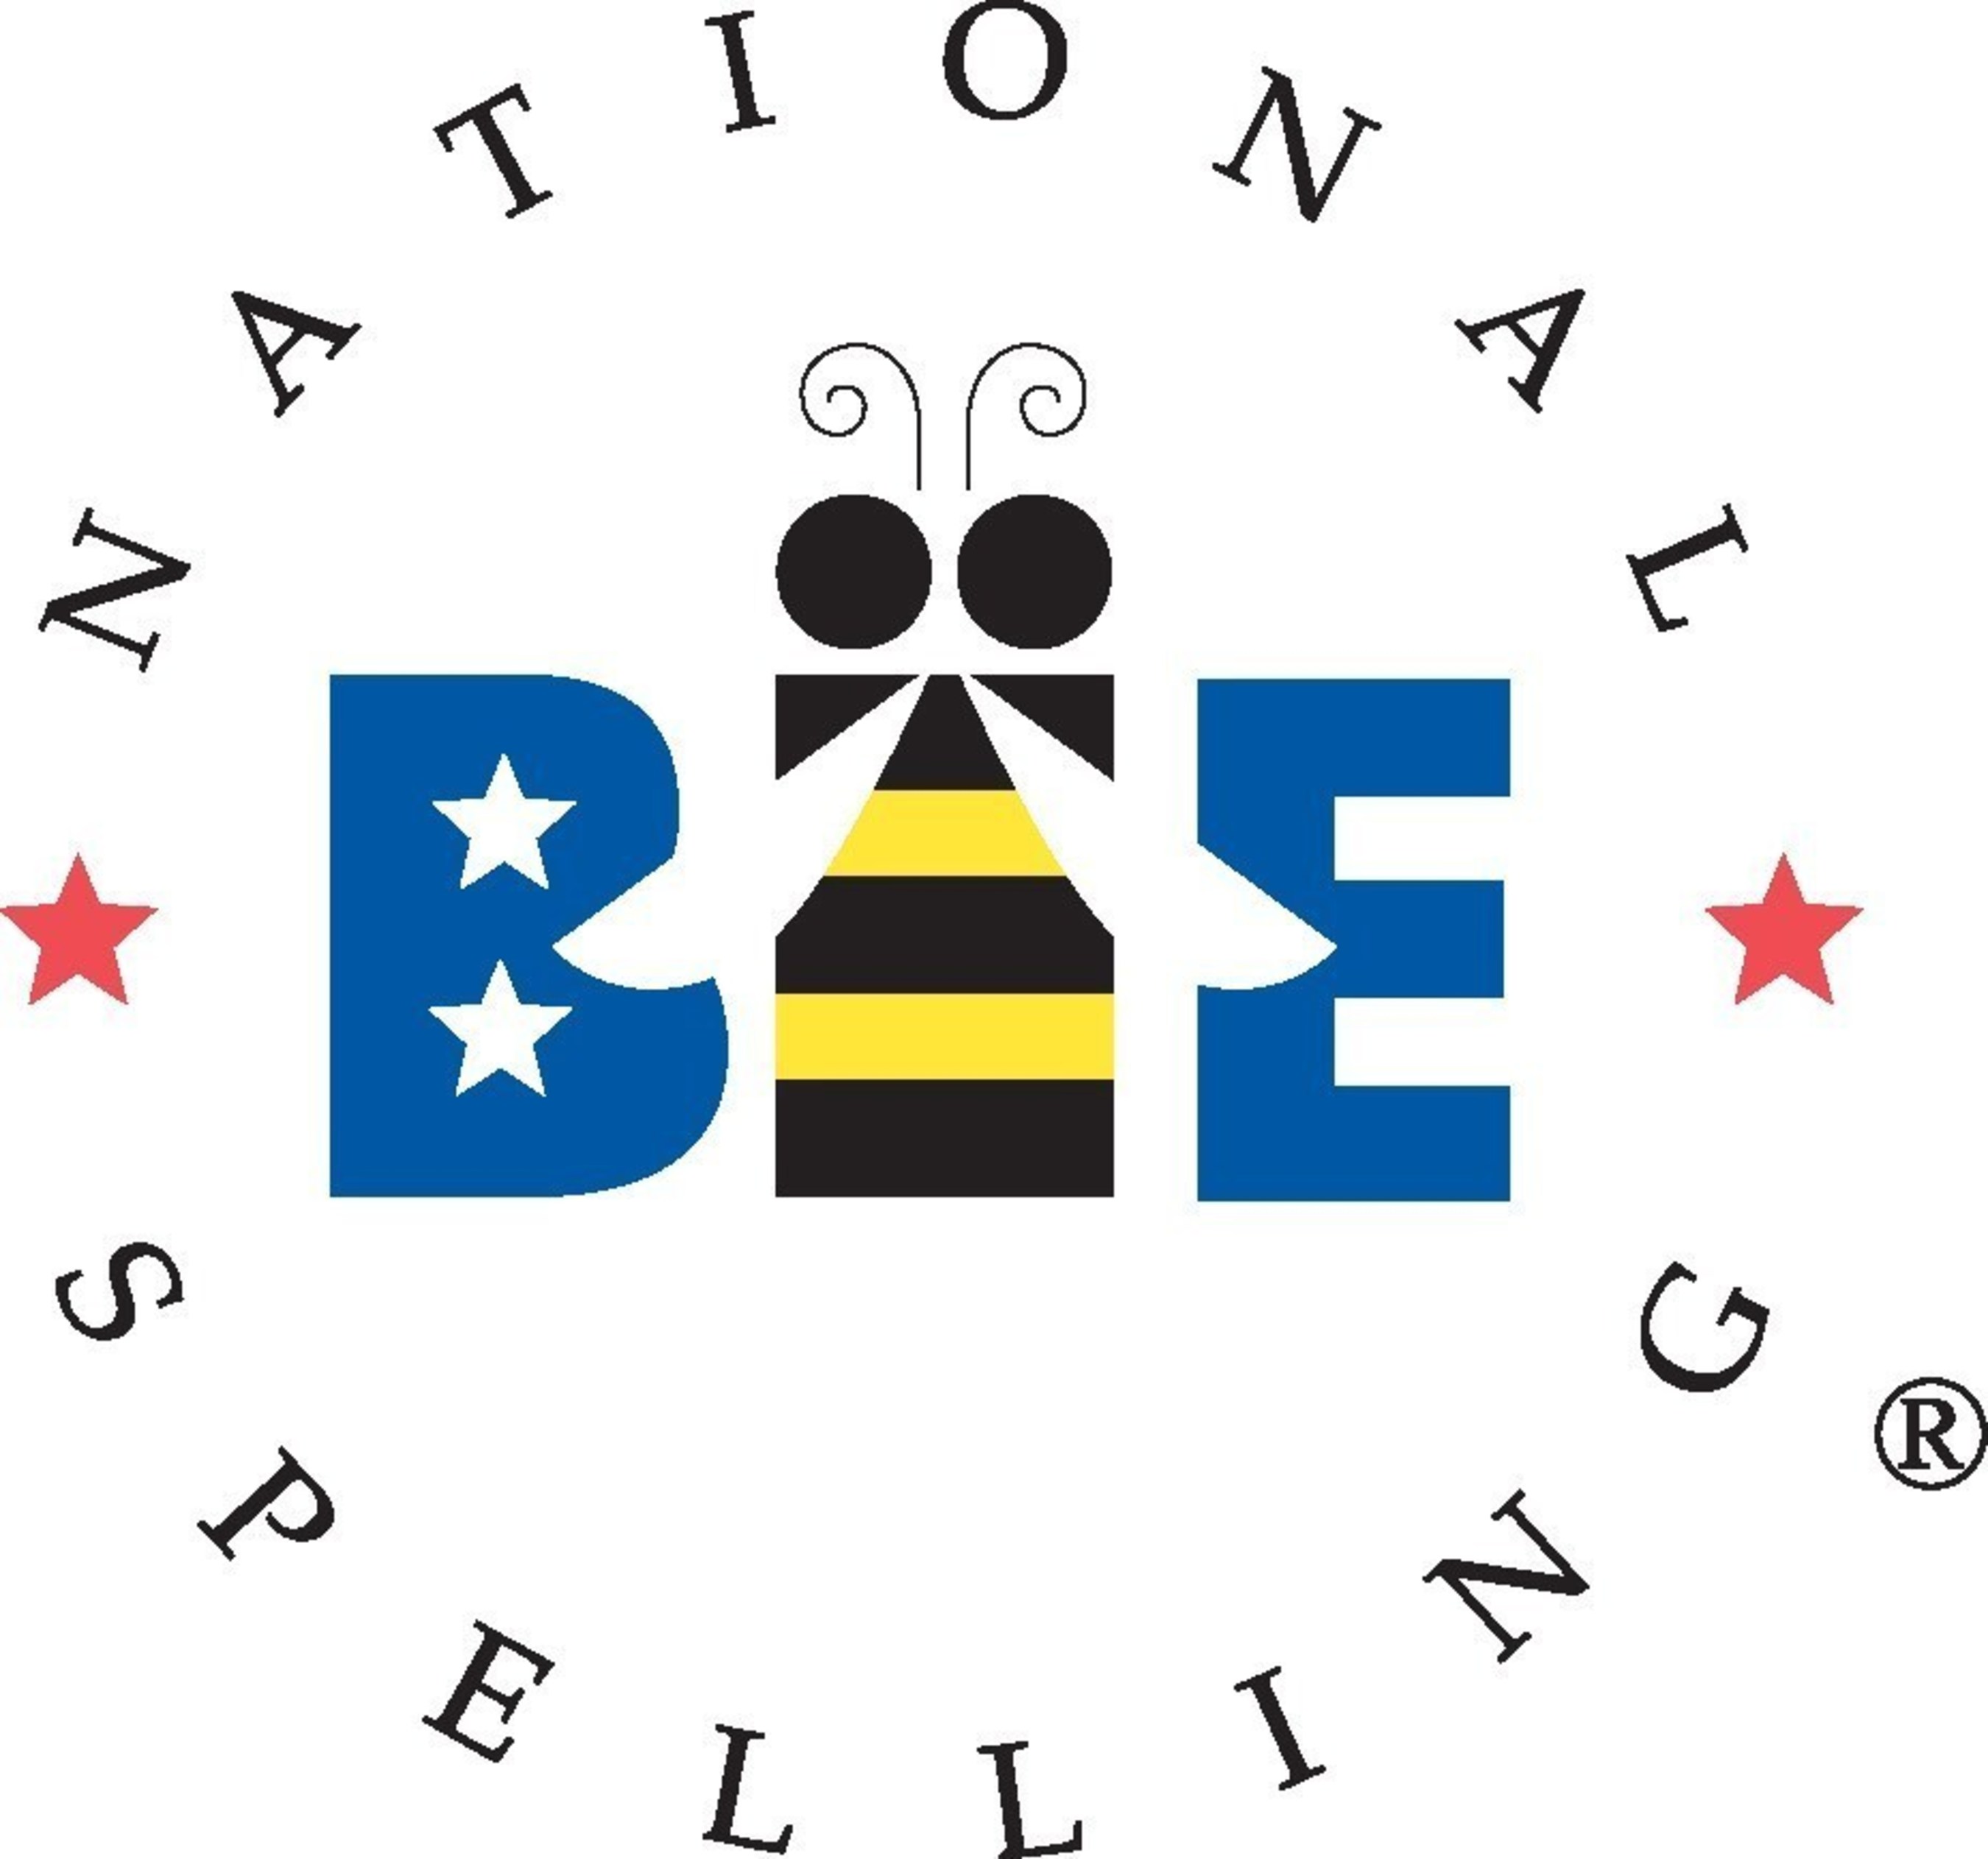 The Scripps National Spelling Bee heads to Washington, D.C. for the "Politicians vs. Press" event at the National Press Club on Oct. 21.